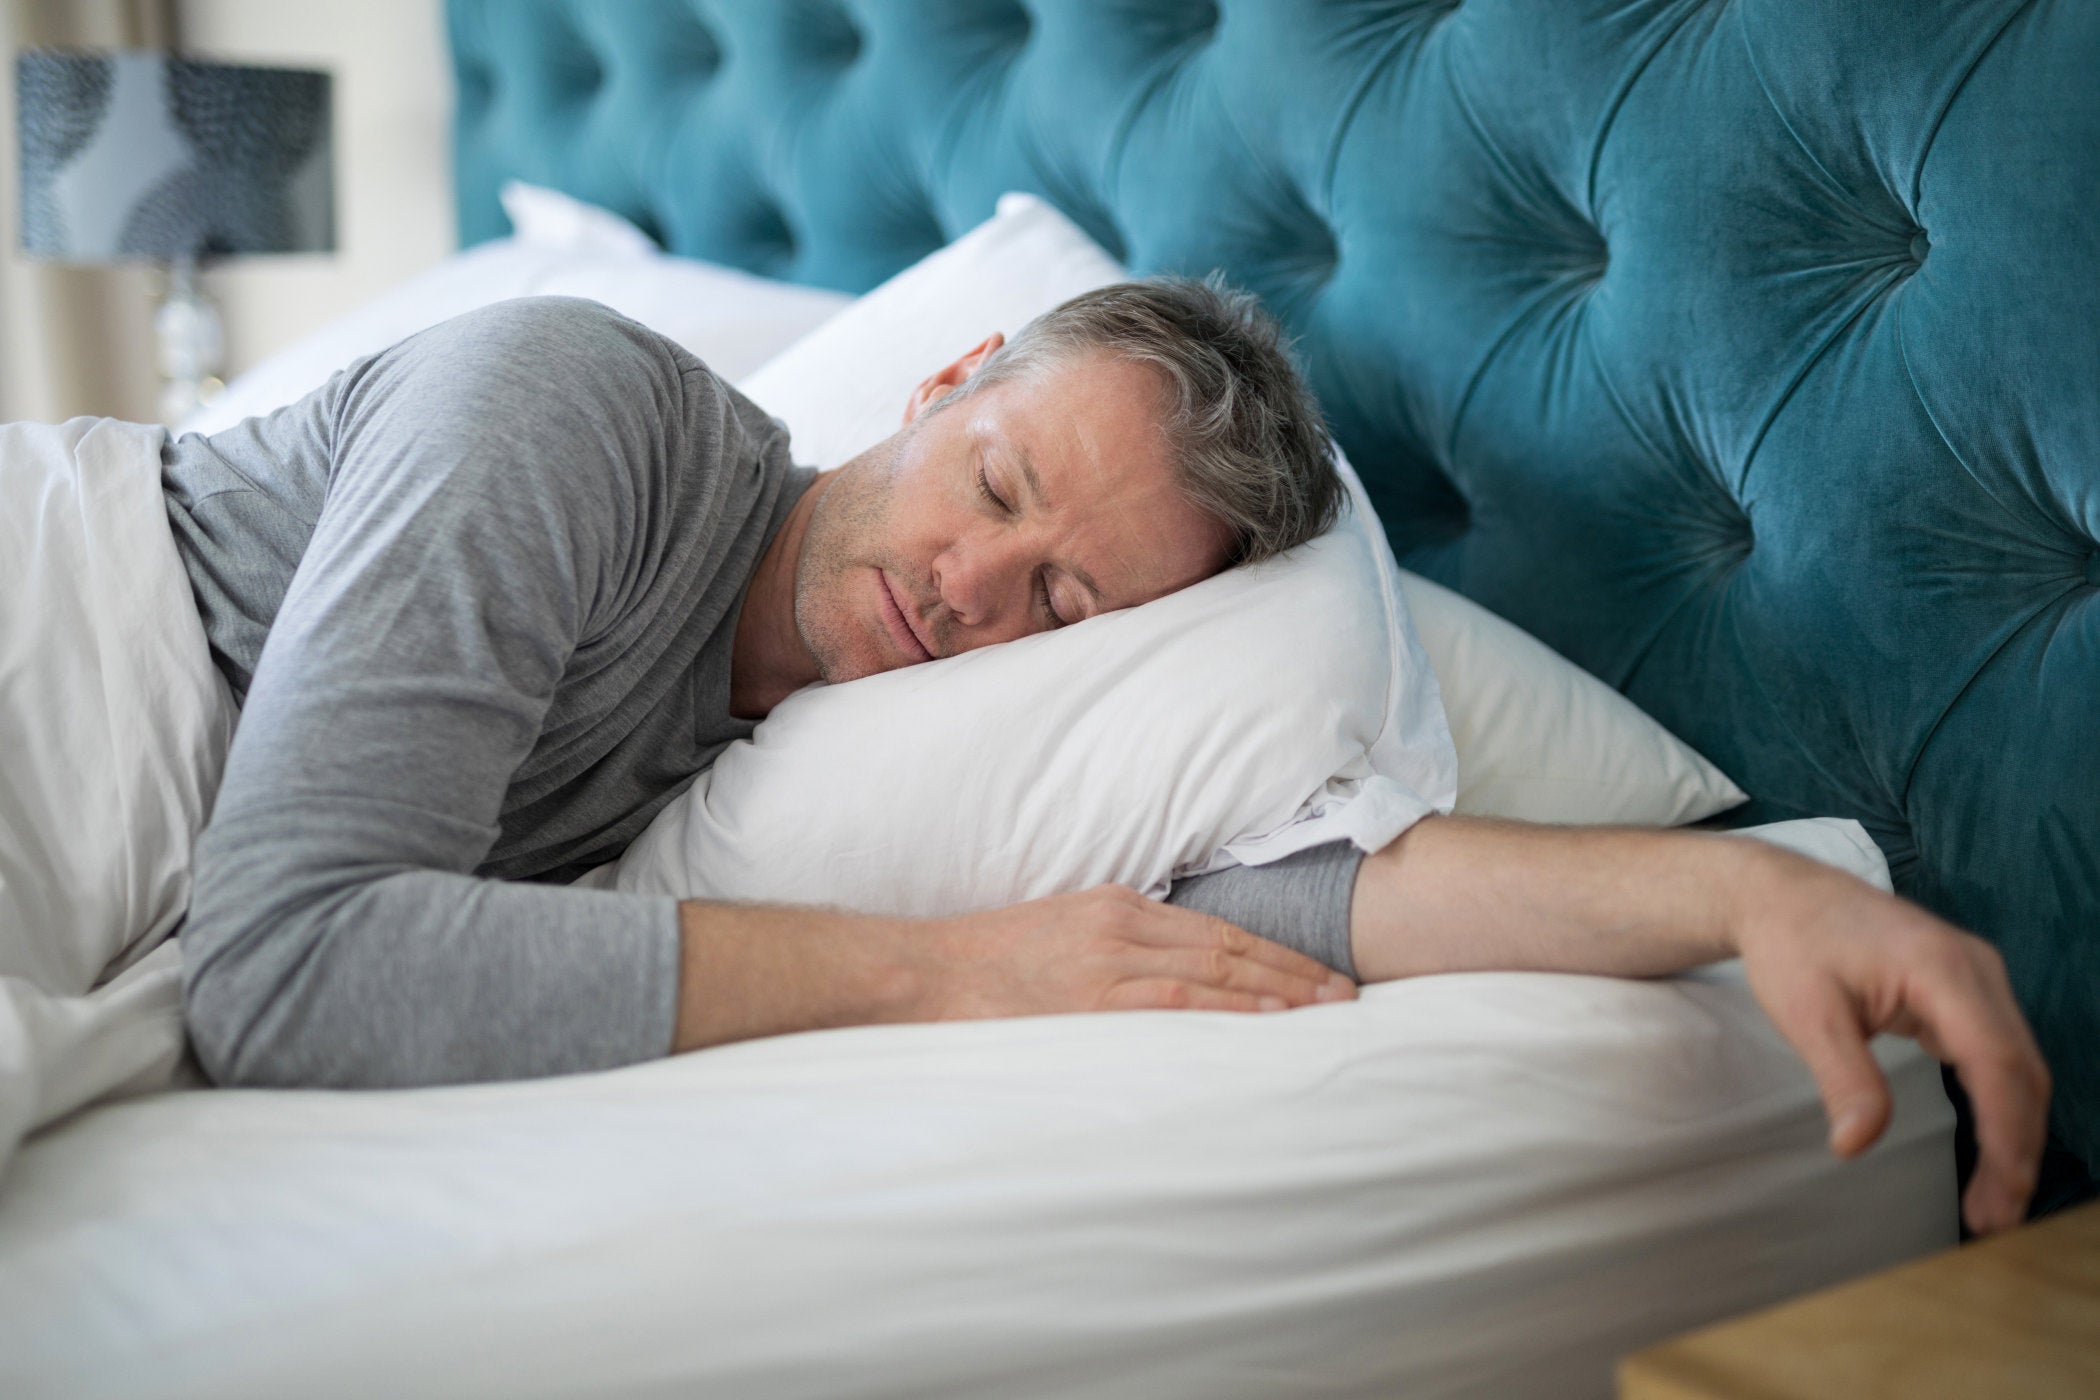 Man sleeping peacefully on a king sized bed with a blue tufted headboard